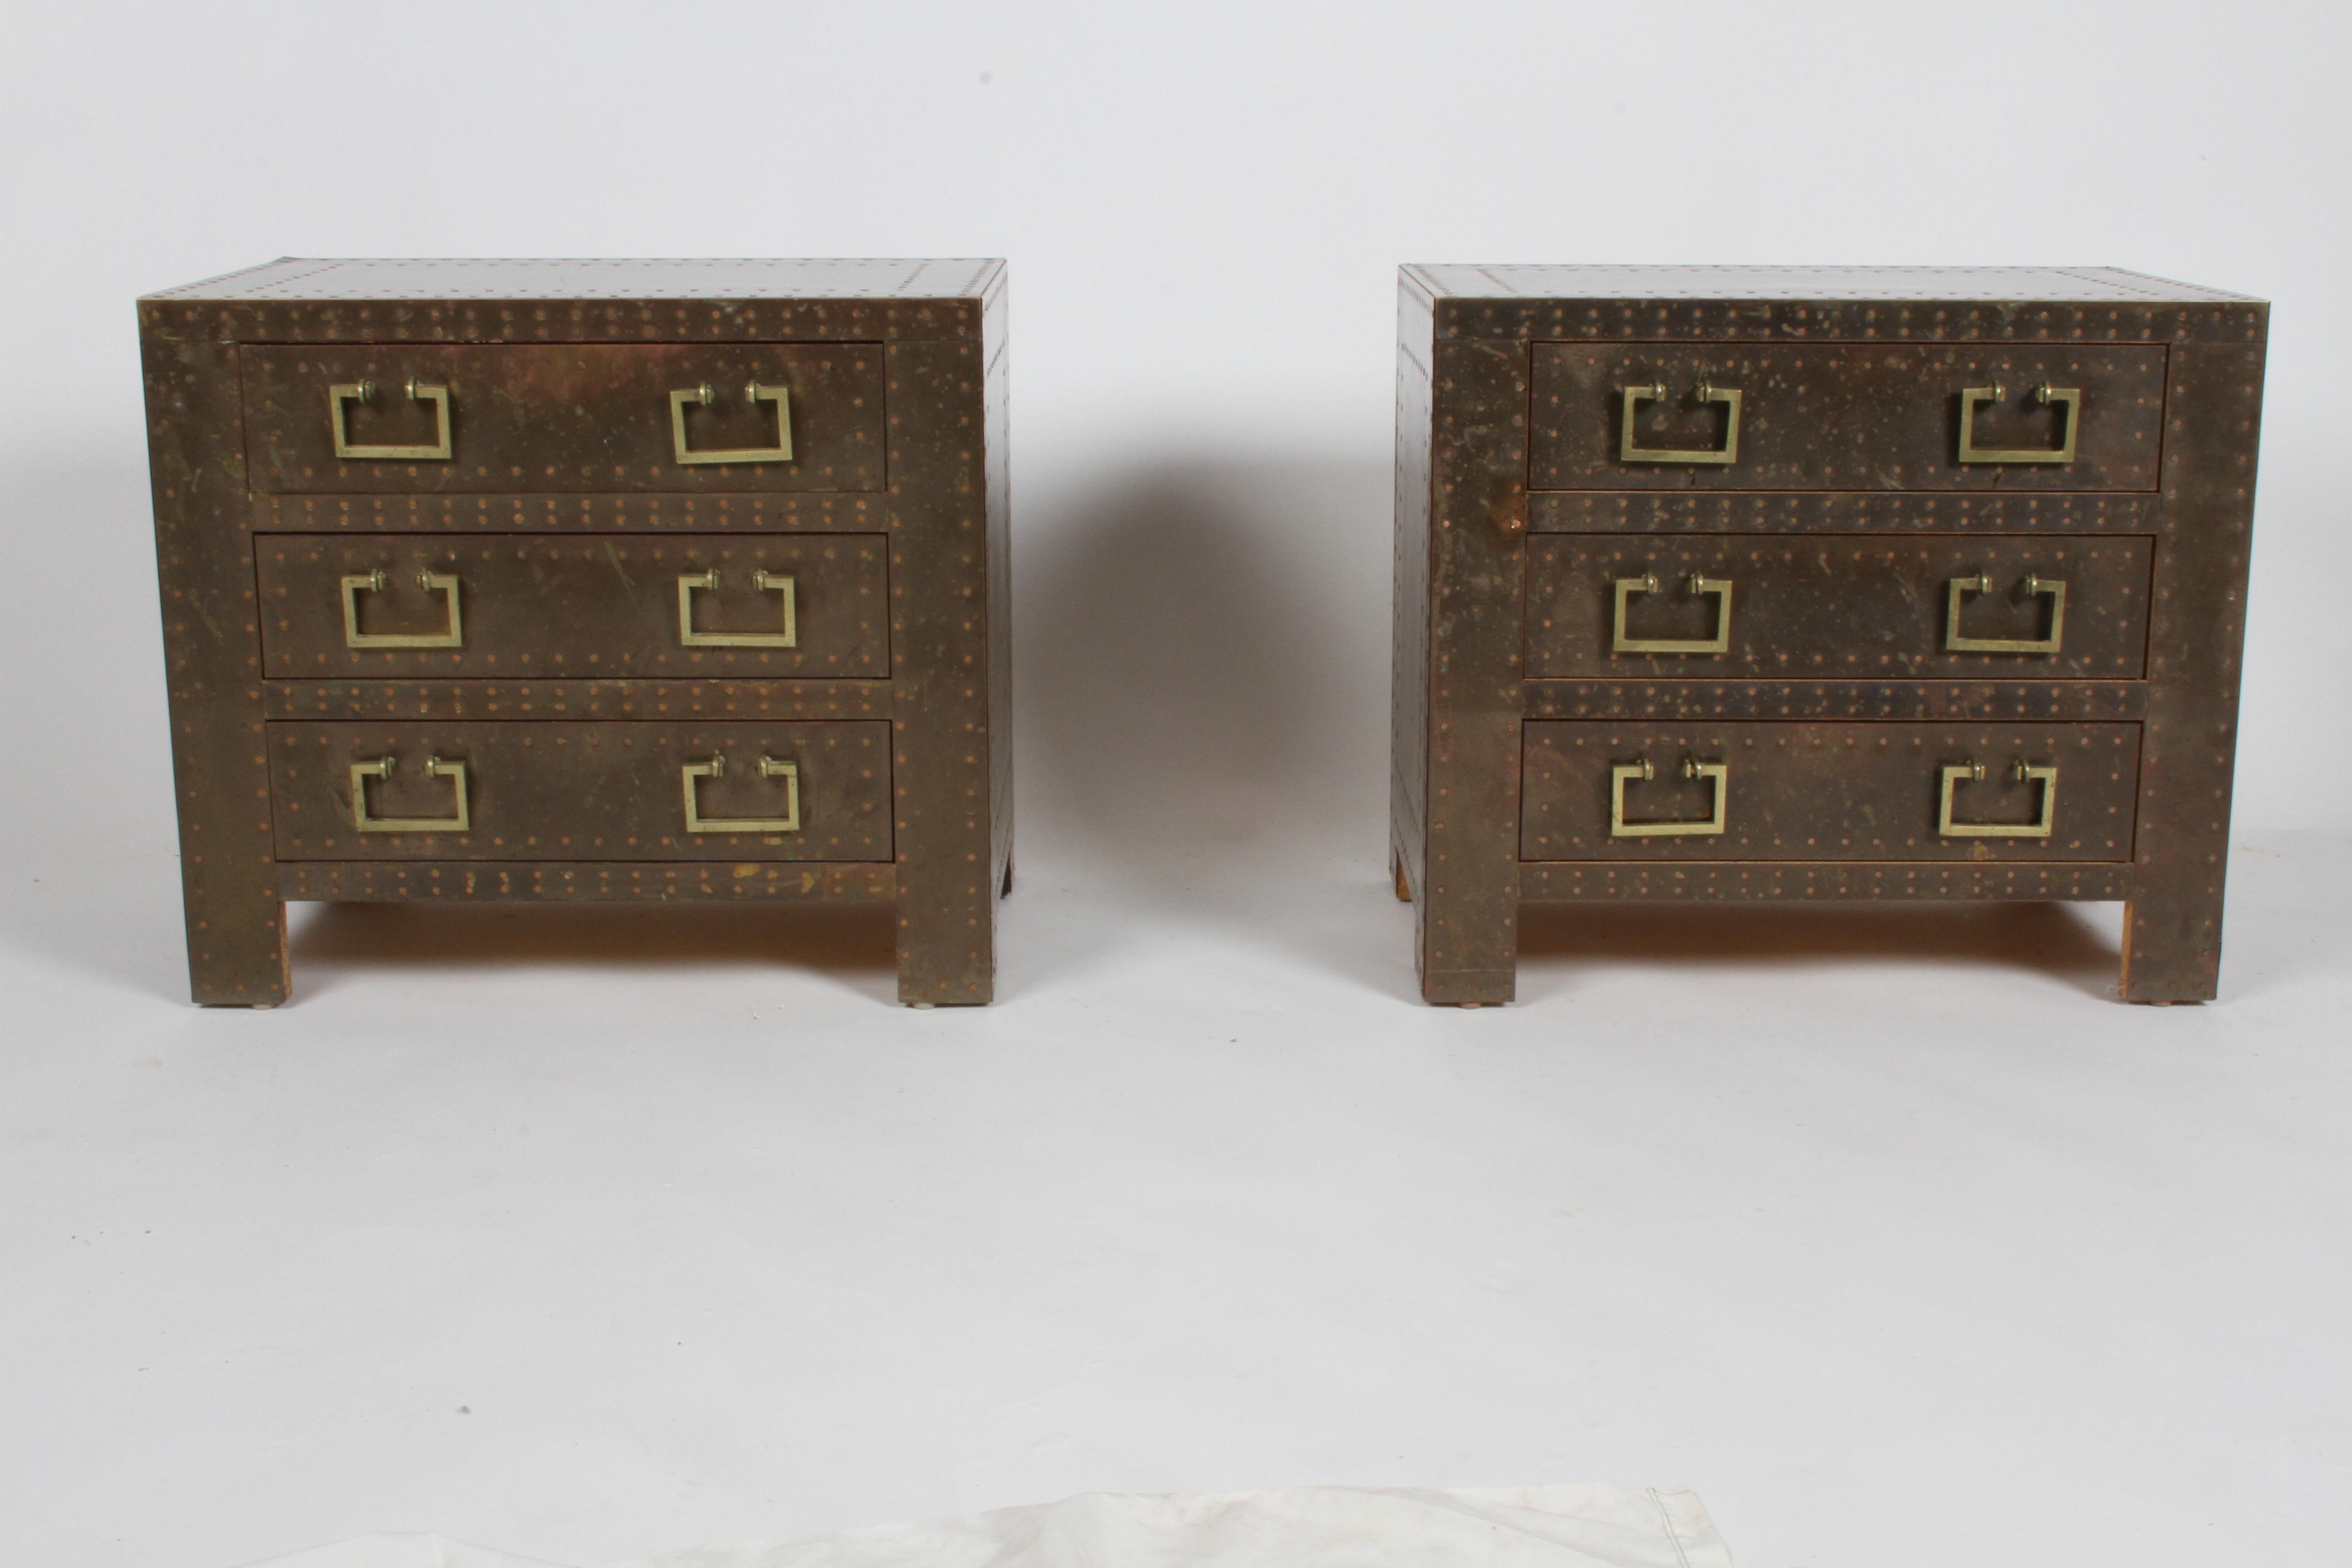 Vintage pair of Hollywood Regency Sarreid brass clad three drawer chests, with copper nail heads and brass handles. Great patina, all nails intact, no damage to brass edges. Chest are great for use for end tables or nightstands. Signed with brass